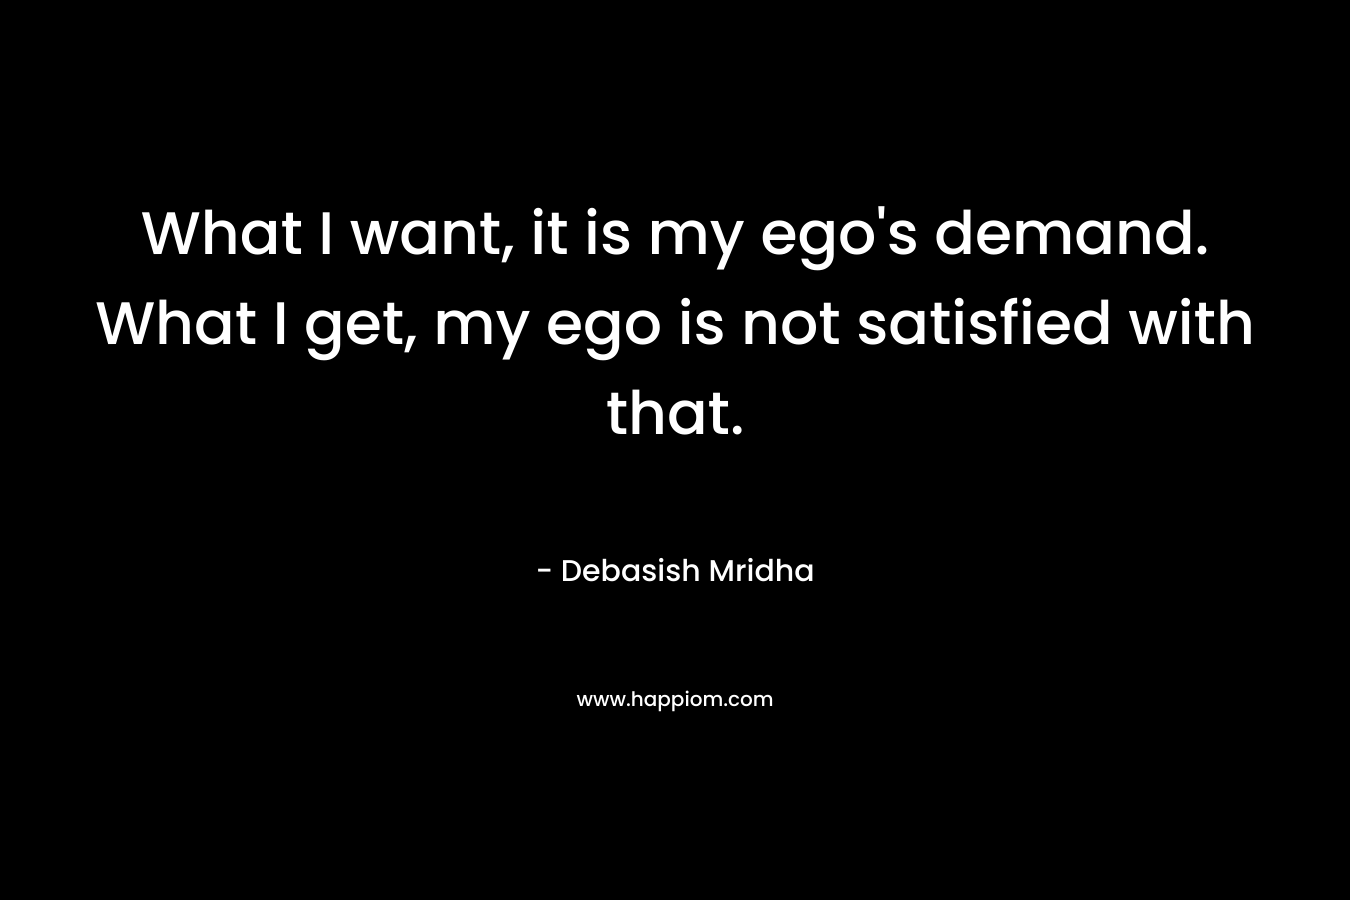 What I want, it is my ego's demand. What I get, my ego is not satisfied with that.